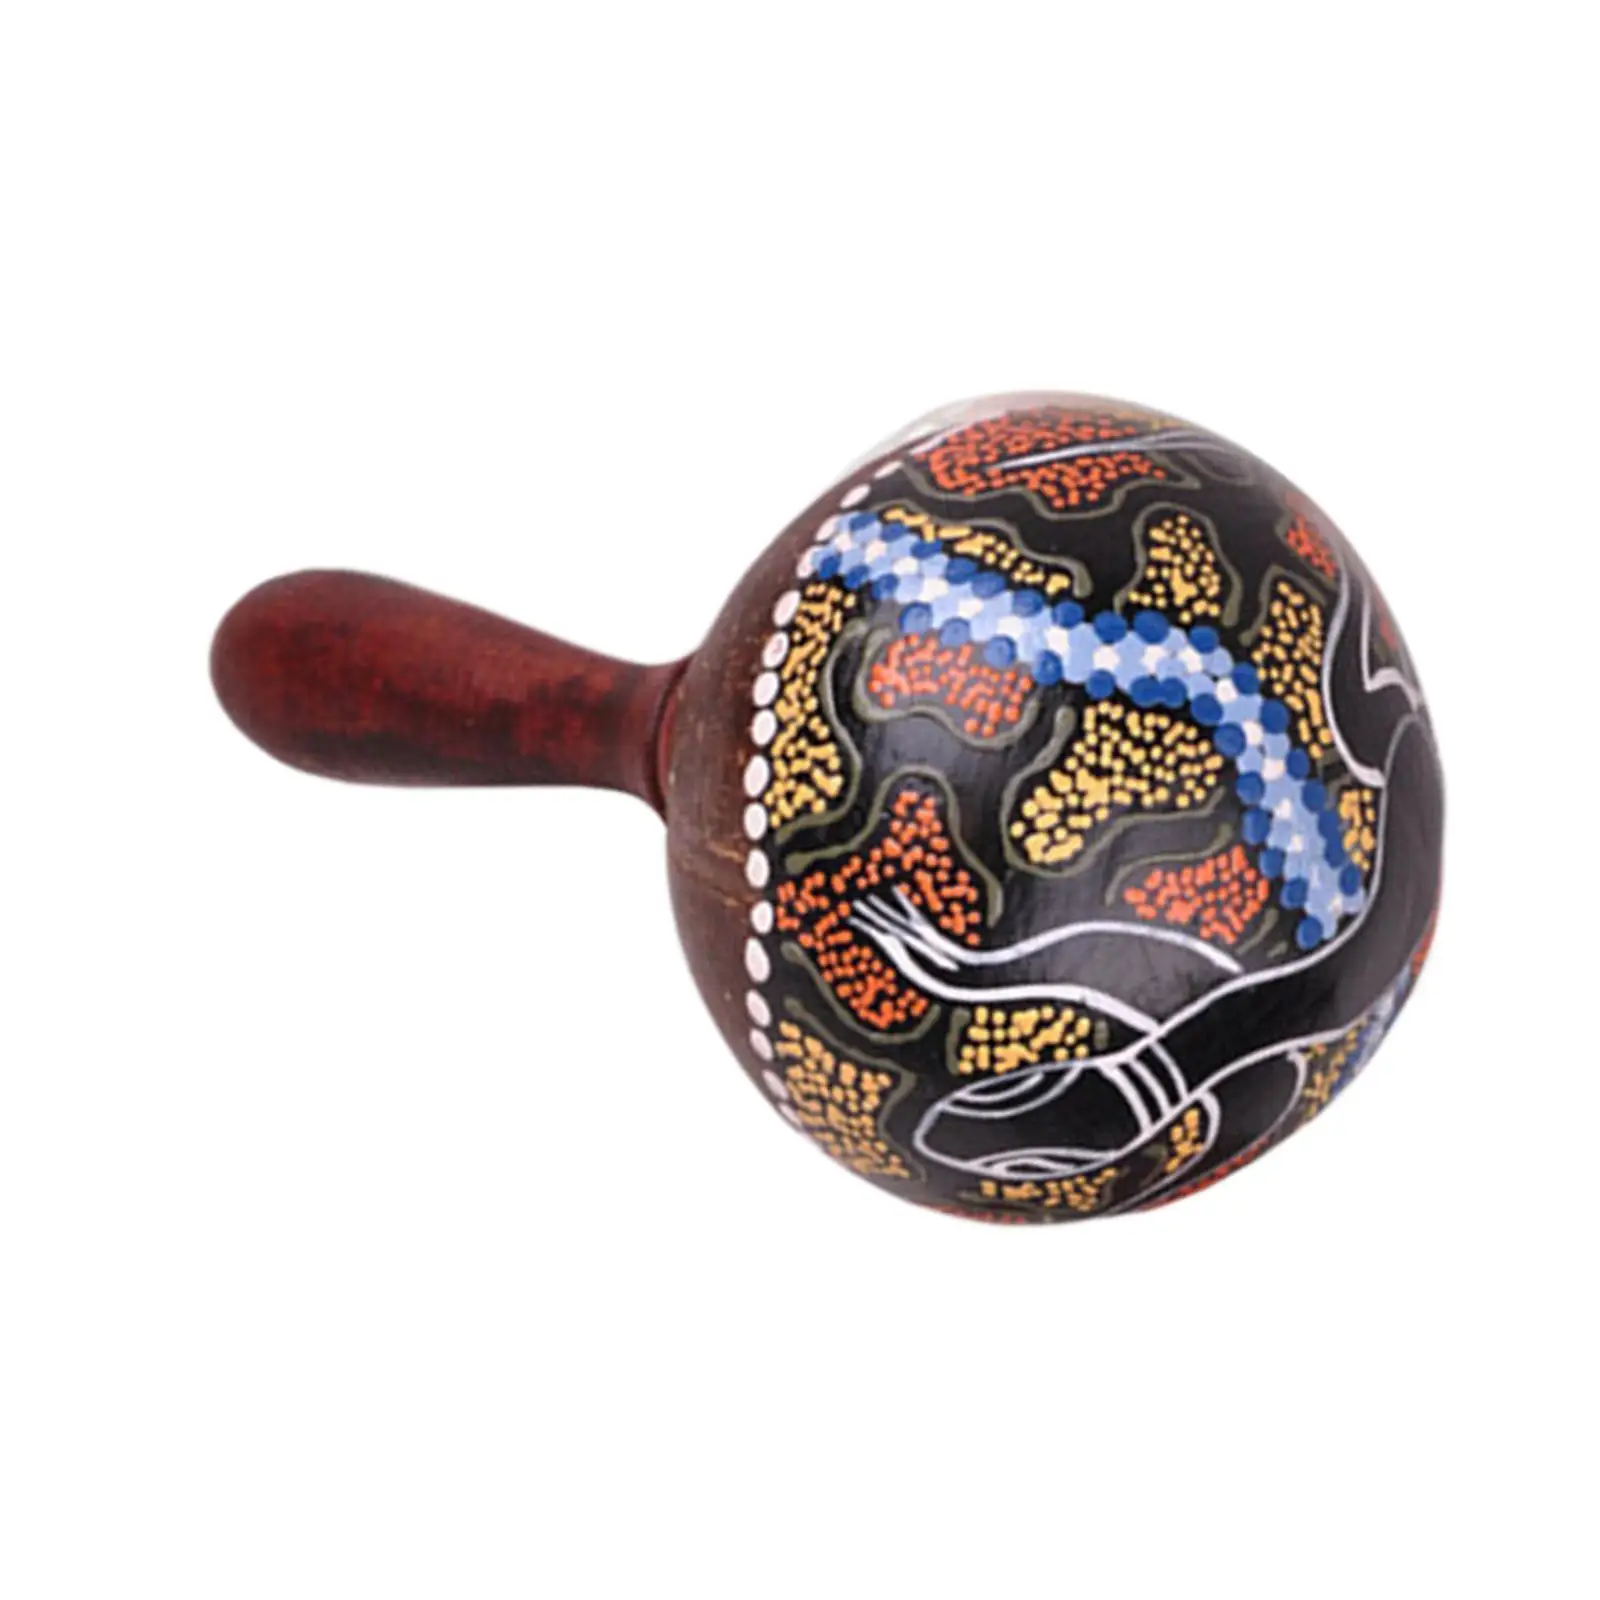 Painted Wooden Maraca Art Craft Toy Hand Percussion Hand Rattle for Gift